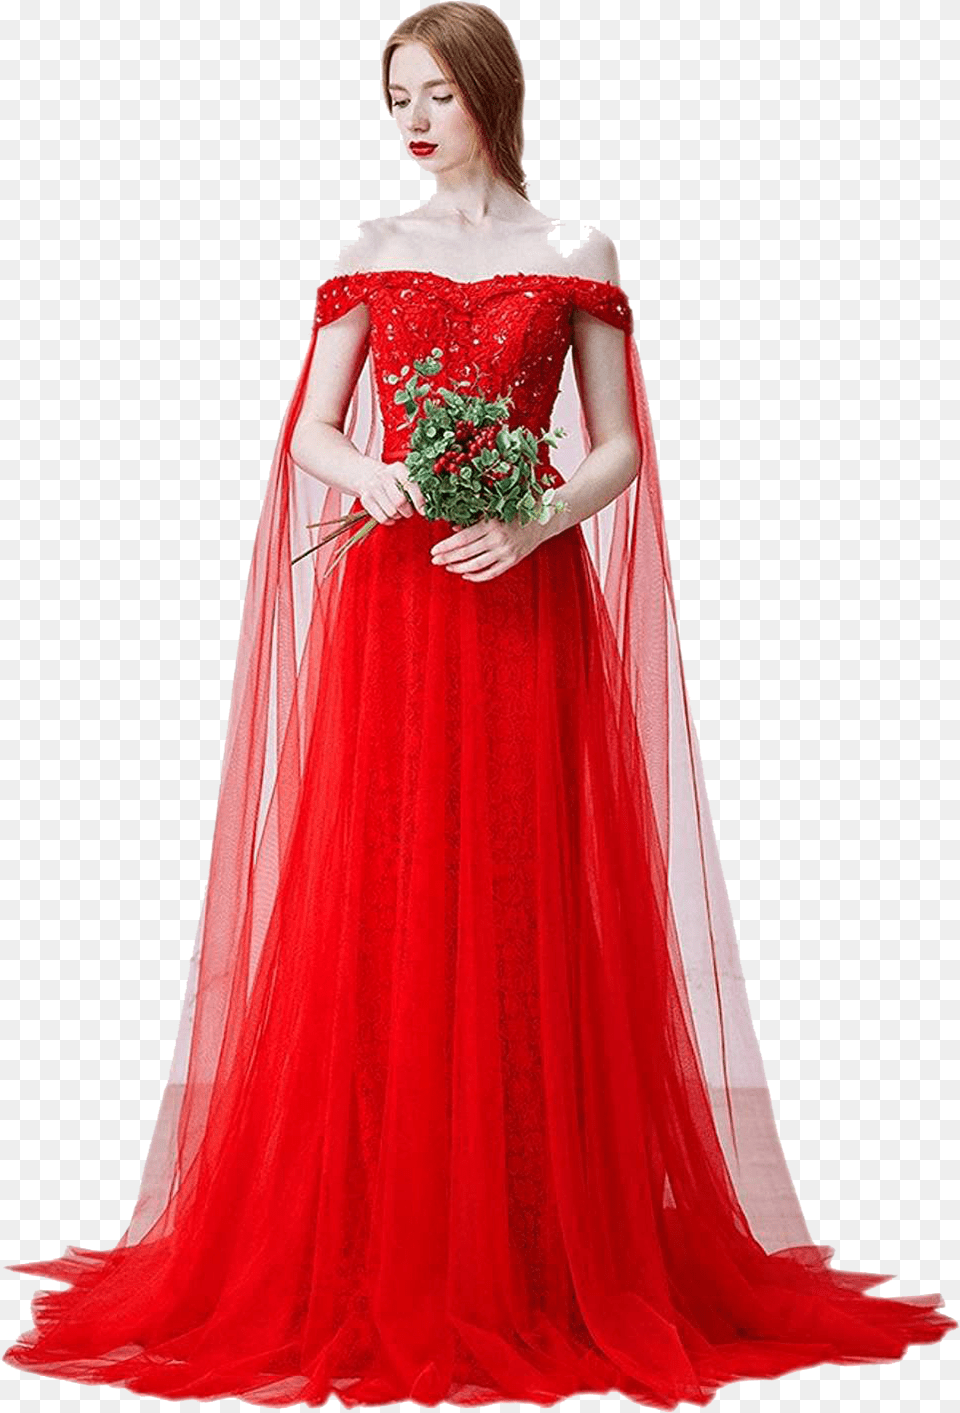 Red Bridal Gowns Download Dress, Wedding Gown, Clothing, Fashion, Wedding Png Image